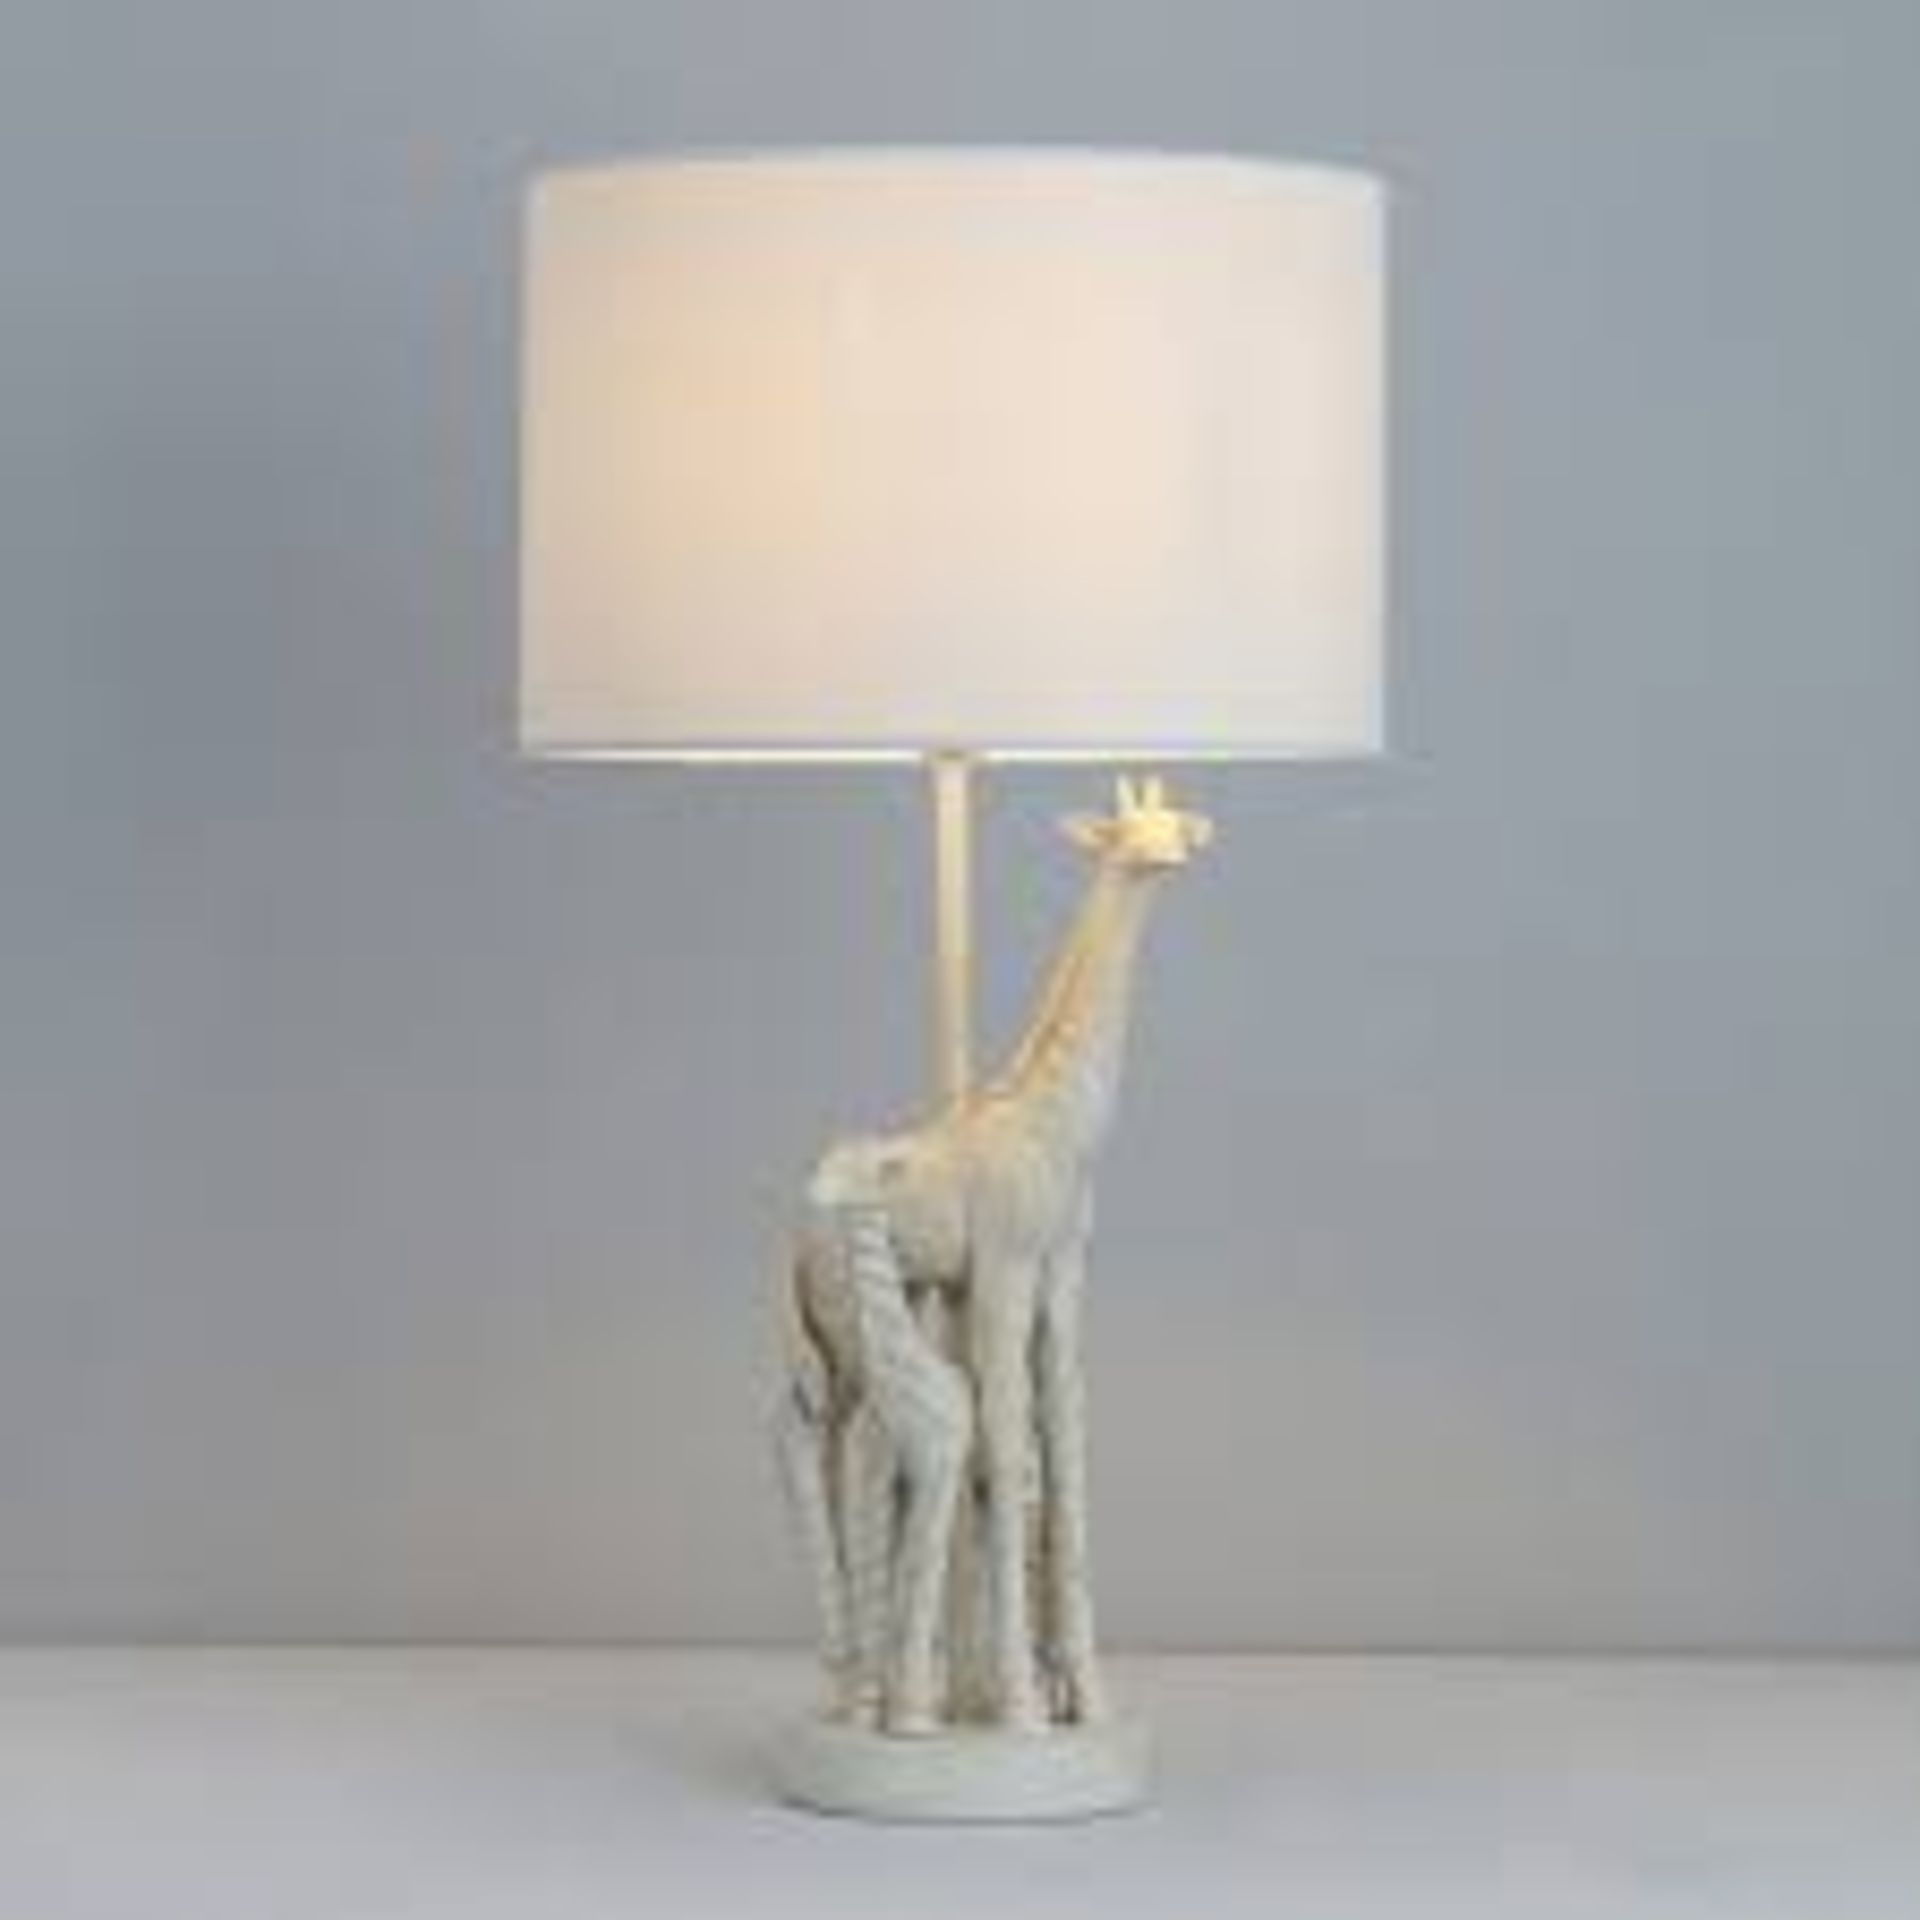 Inlight Metis Giraffe Ivory Table light - PW. This on-trend ivory table lamp features a mother and